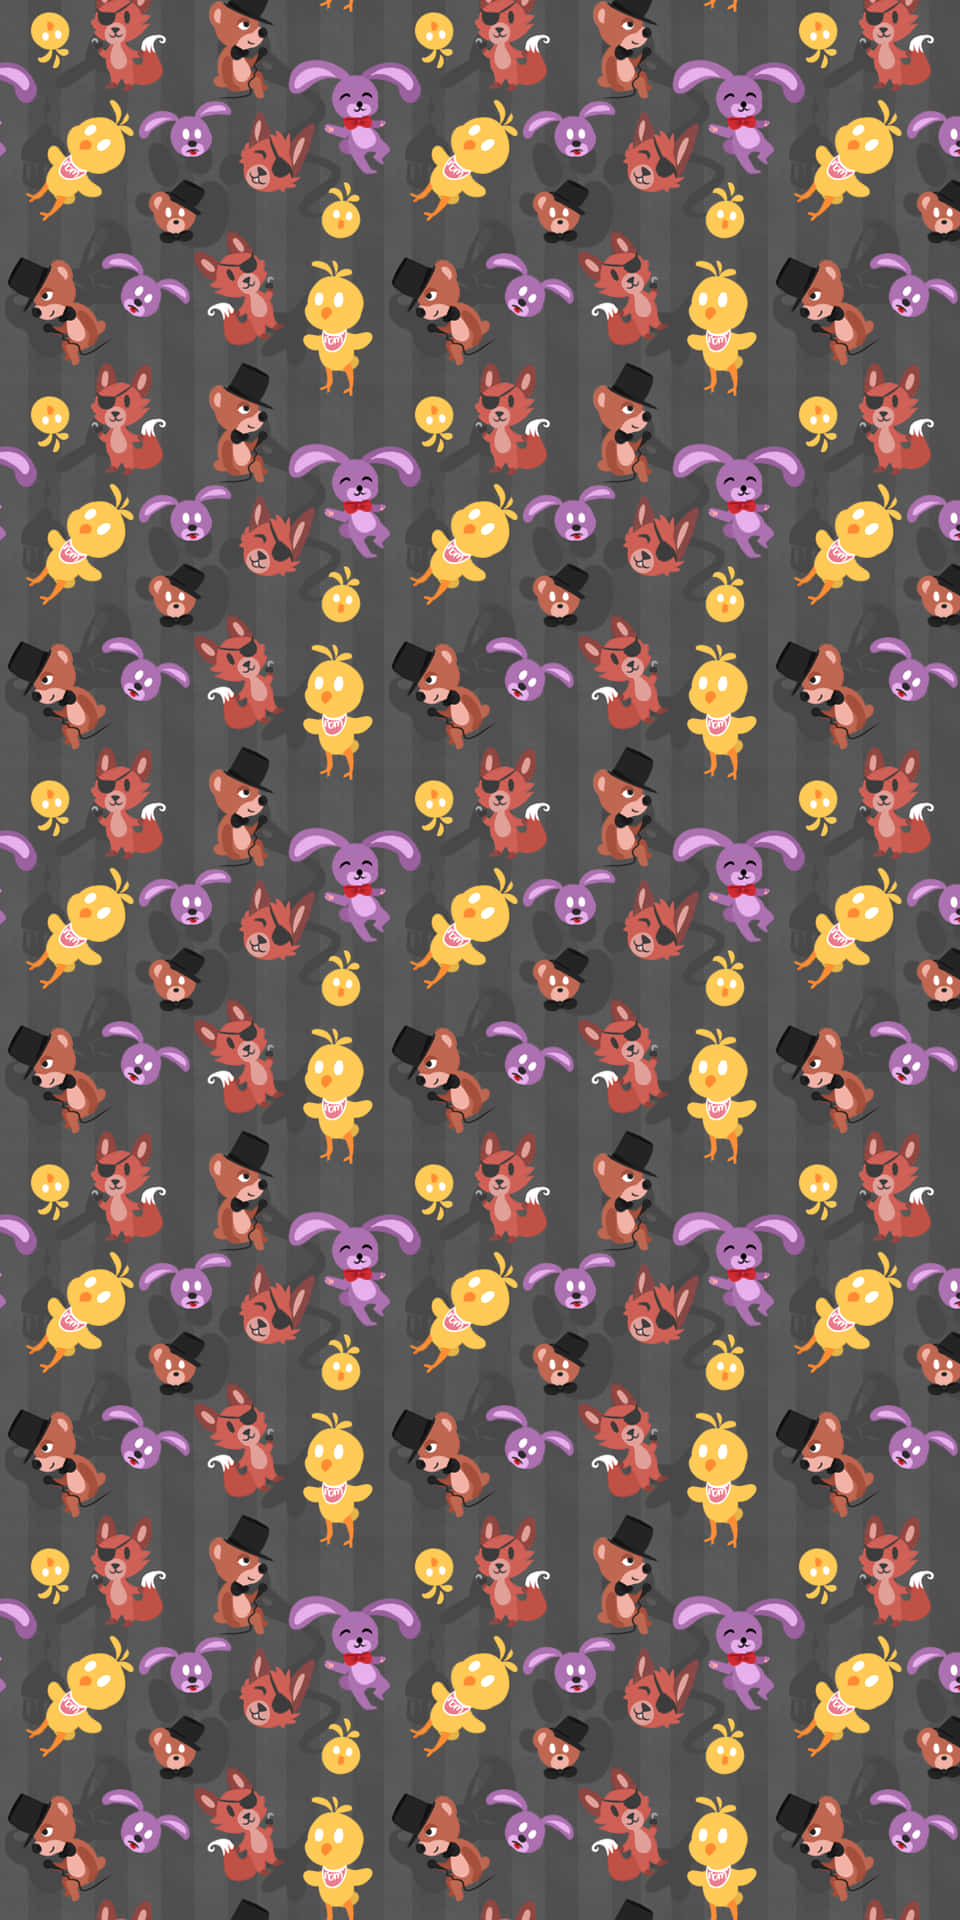 A Pattern With Many Different Characters On It